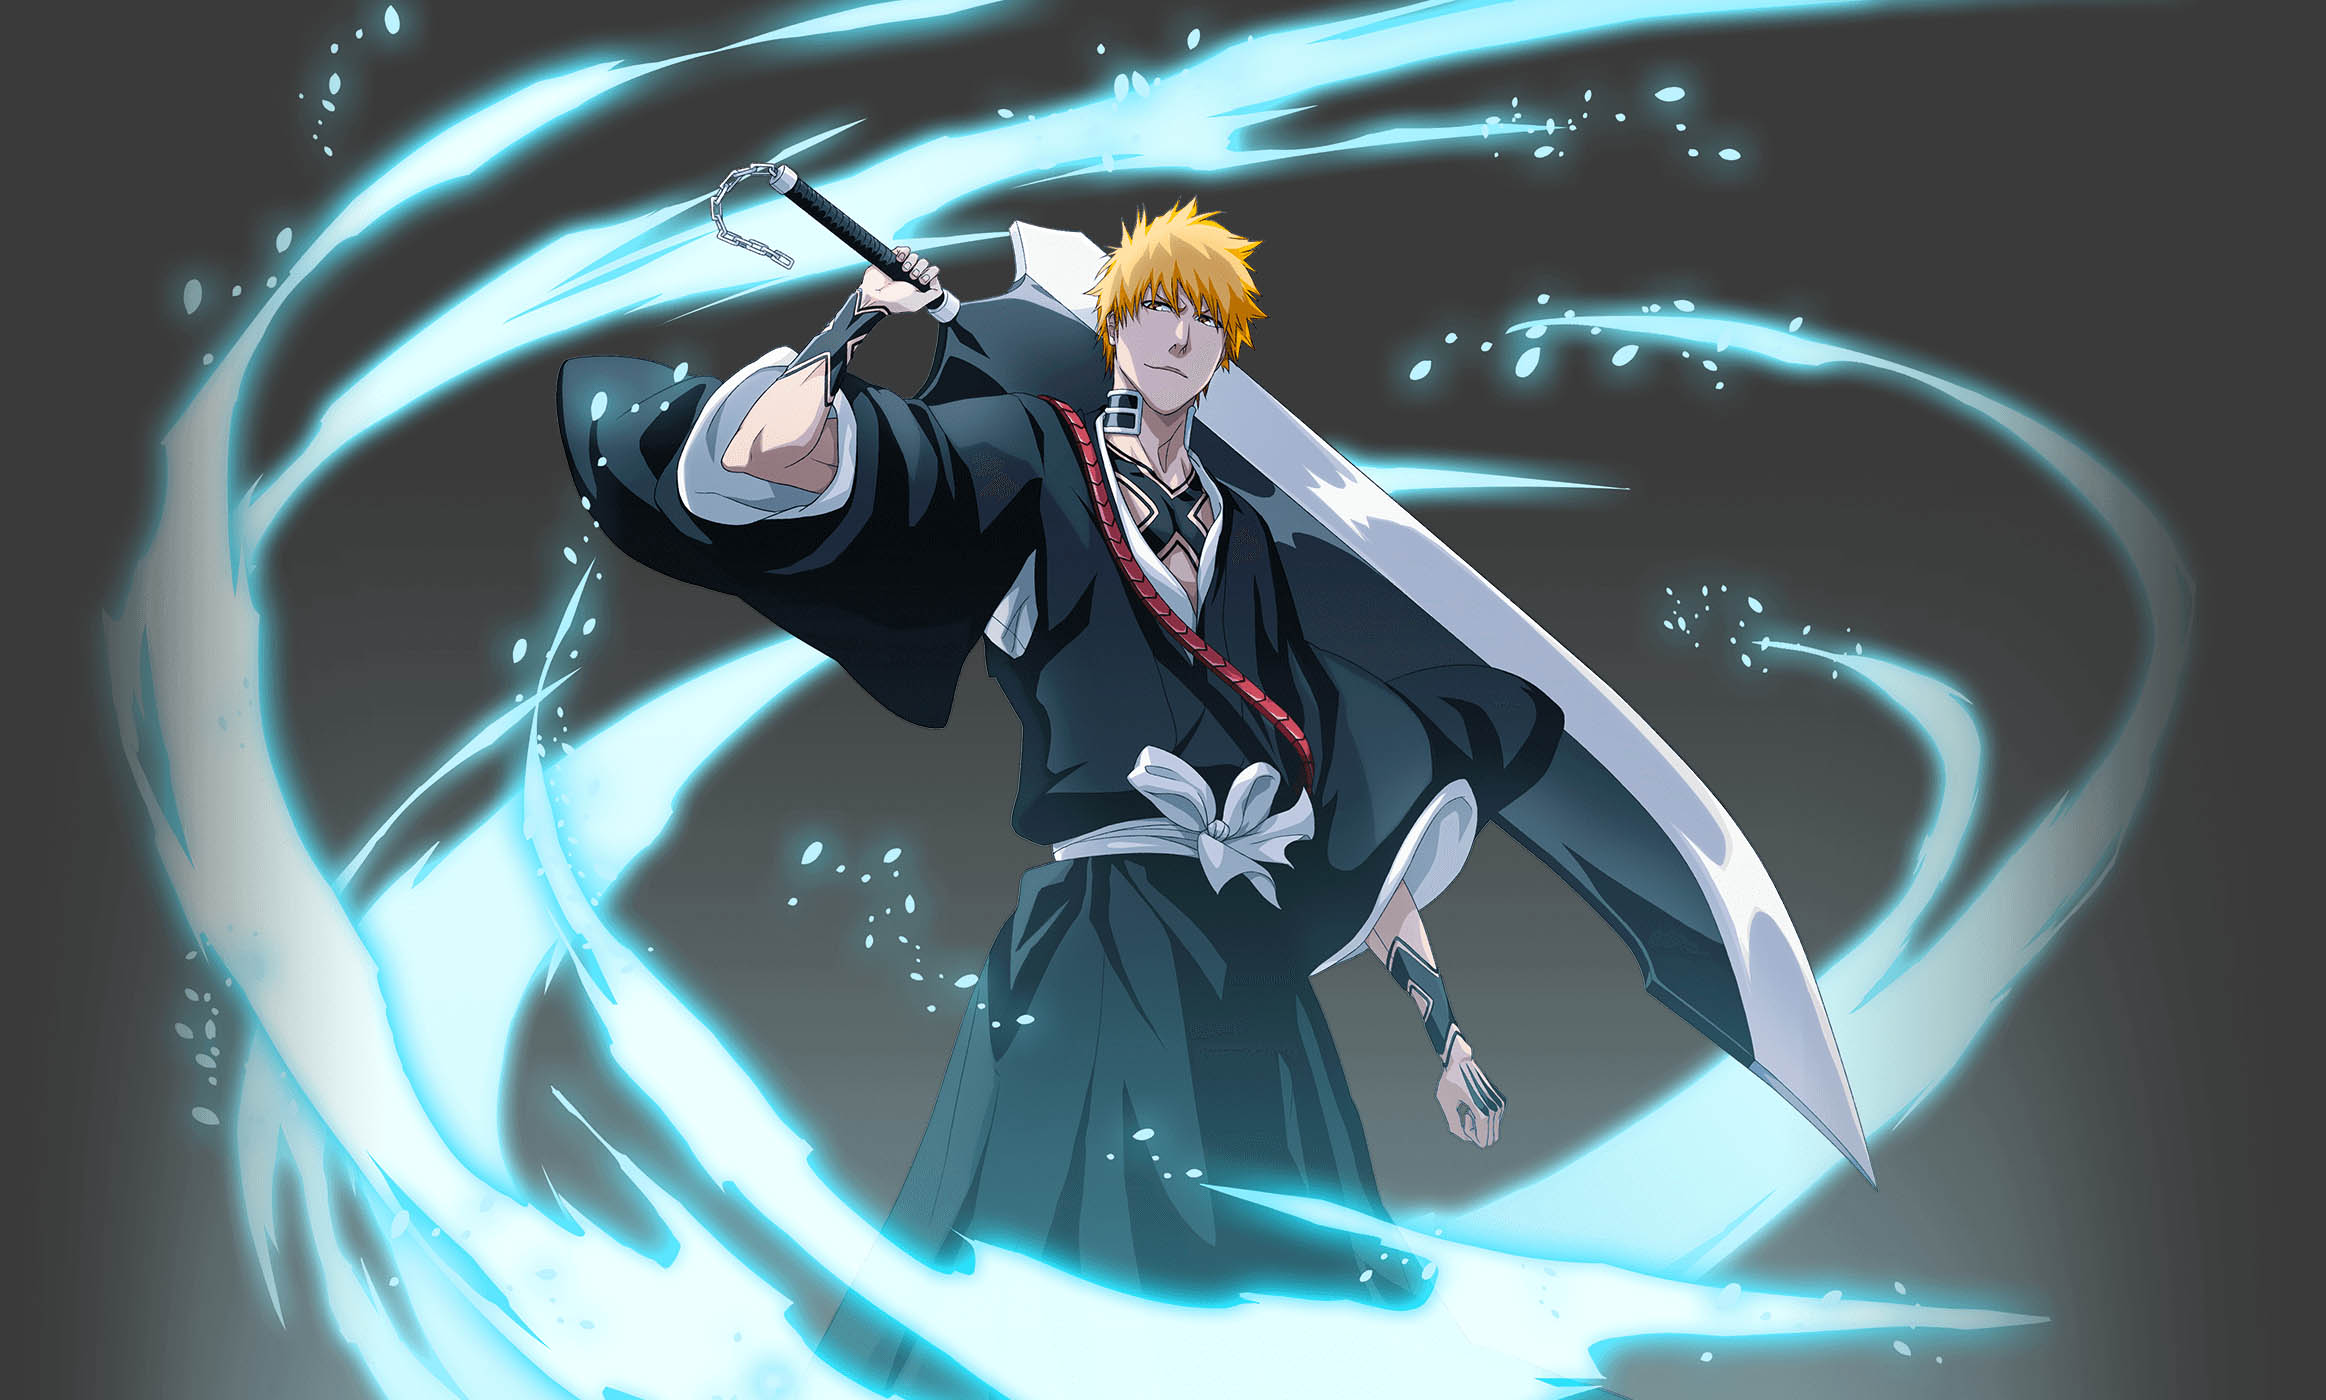 The Final Bleach Manga Arc Will Finally Get Adapted Into an Anime in 2021.